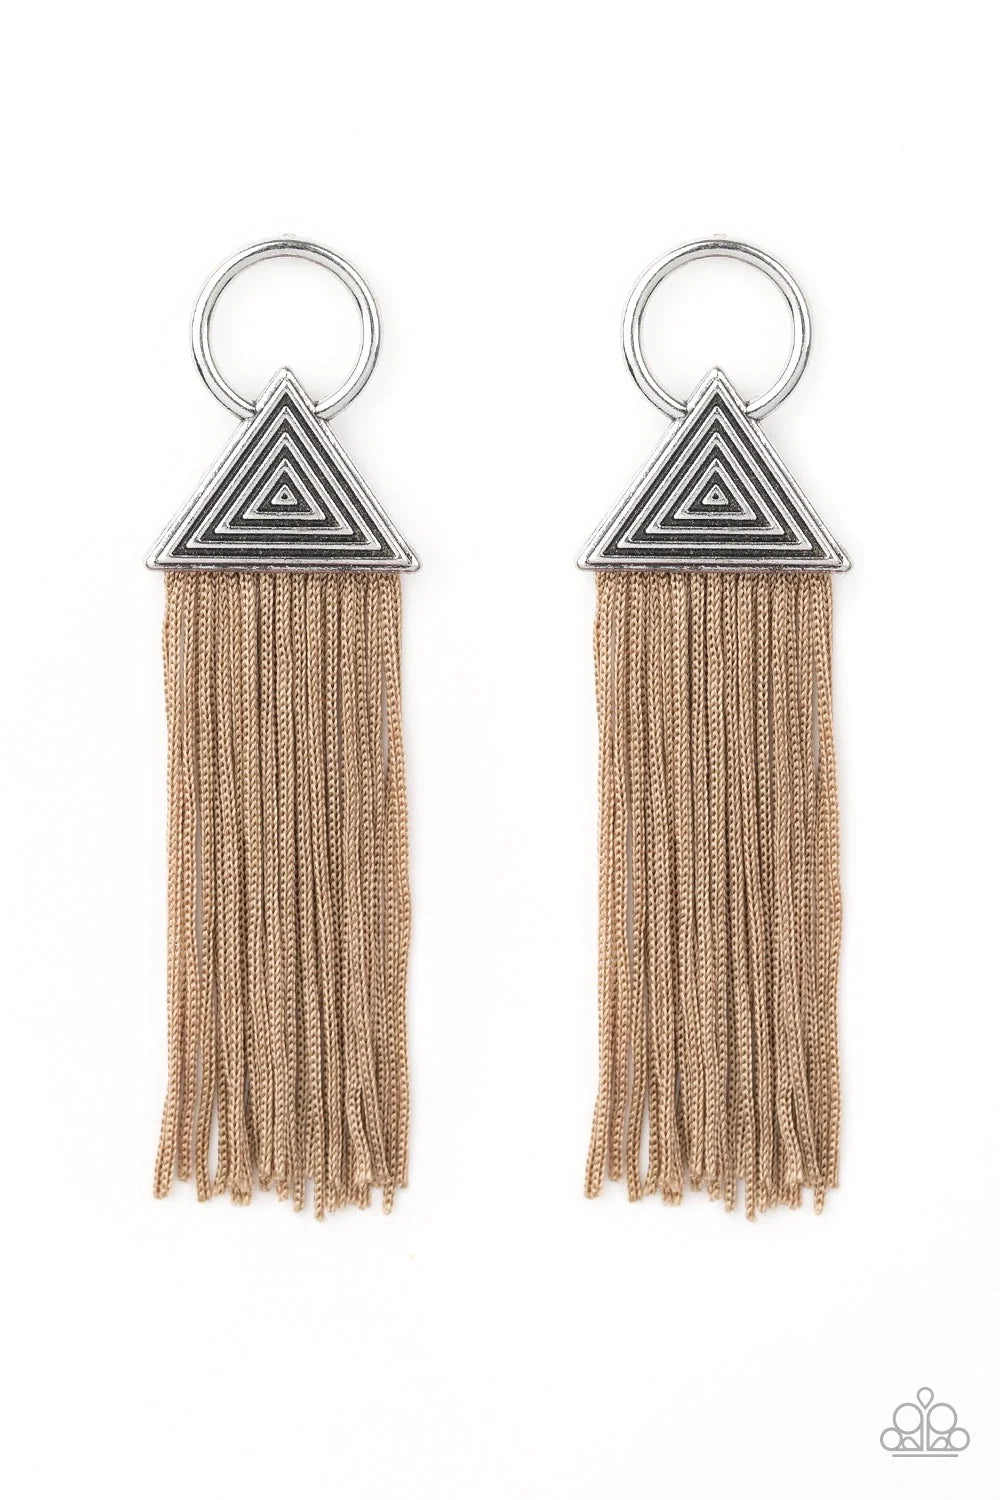 Oh My GIZA- Brown Earrings- Paparazzi Accessories